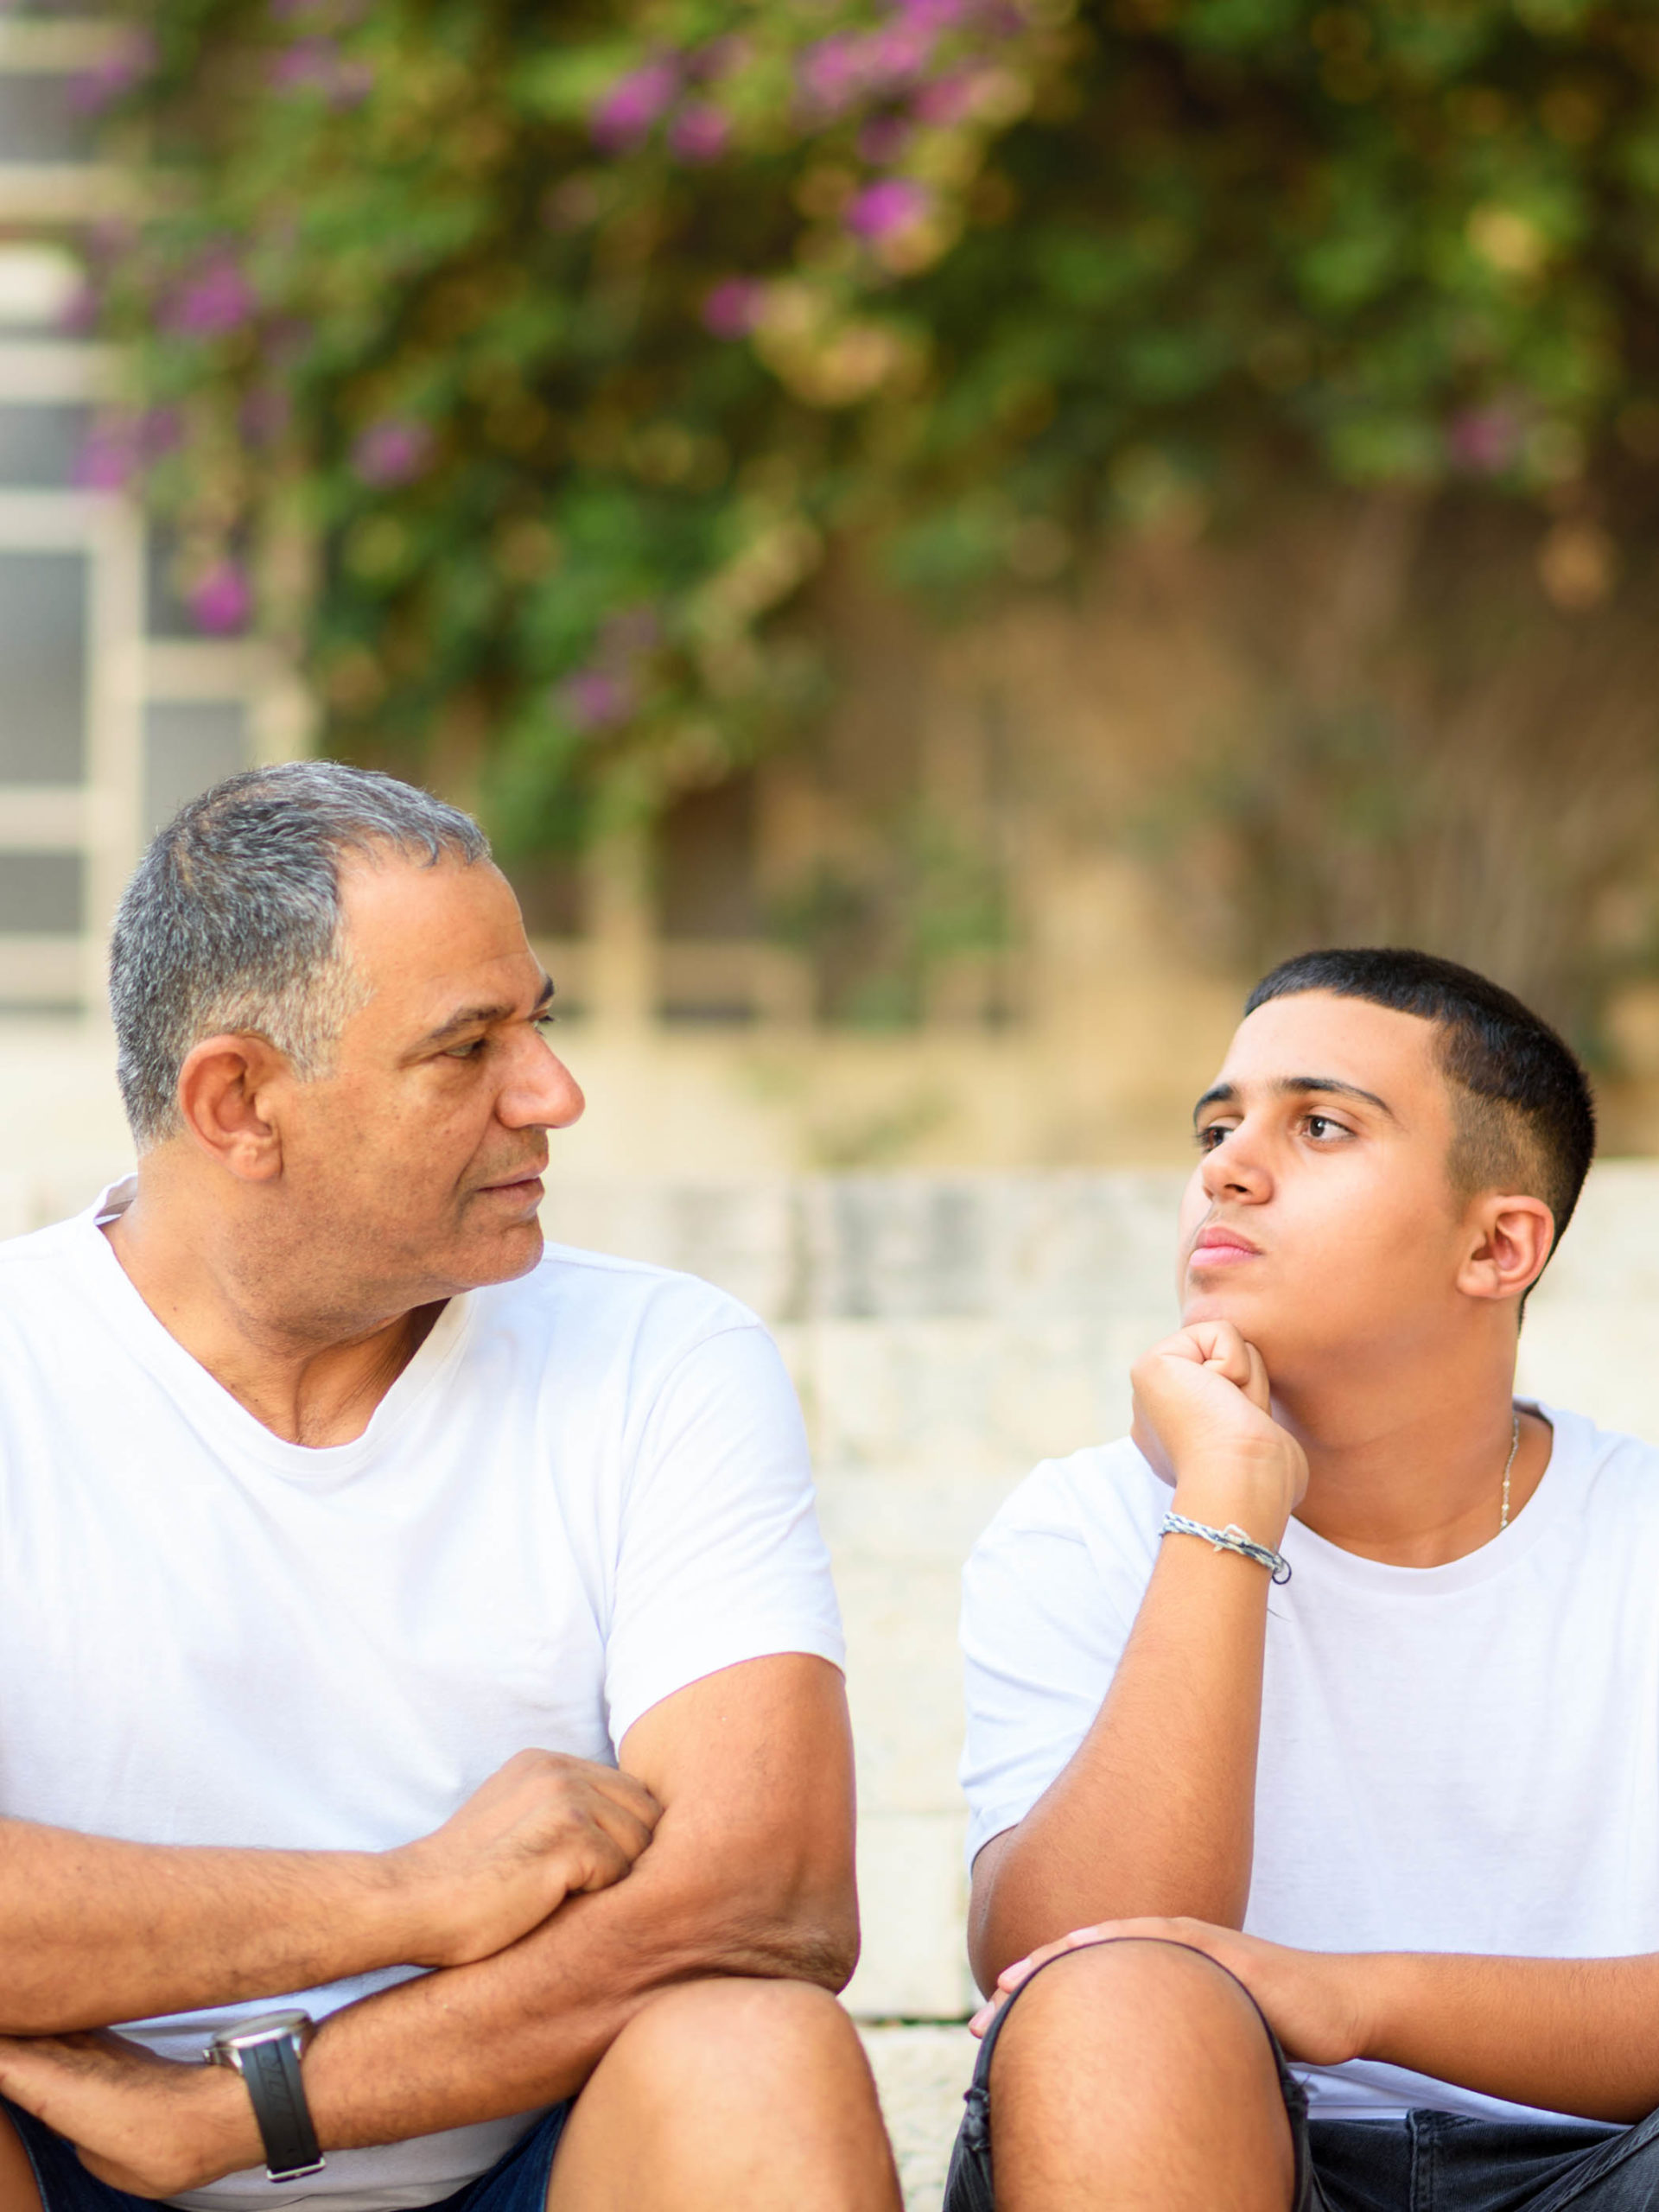 Teenage son and father sitting on stairs outdoors talking